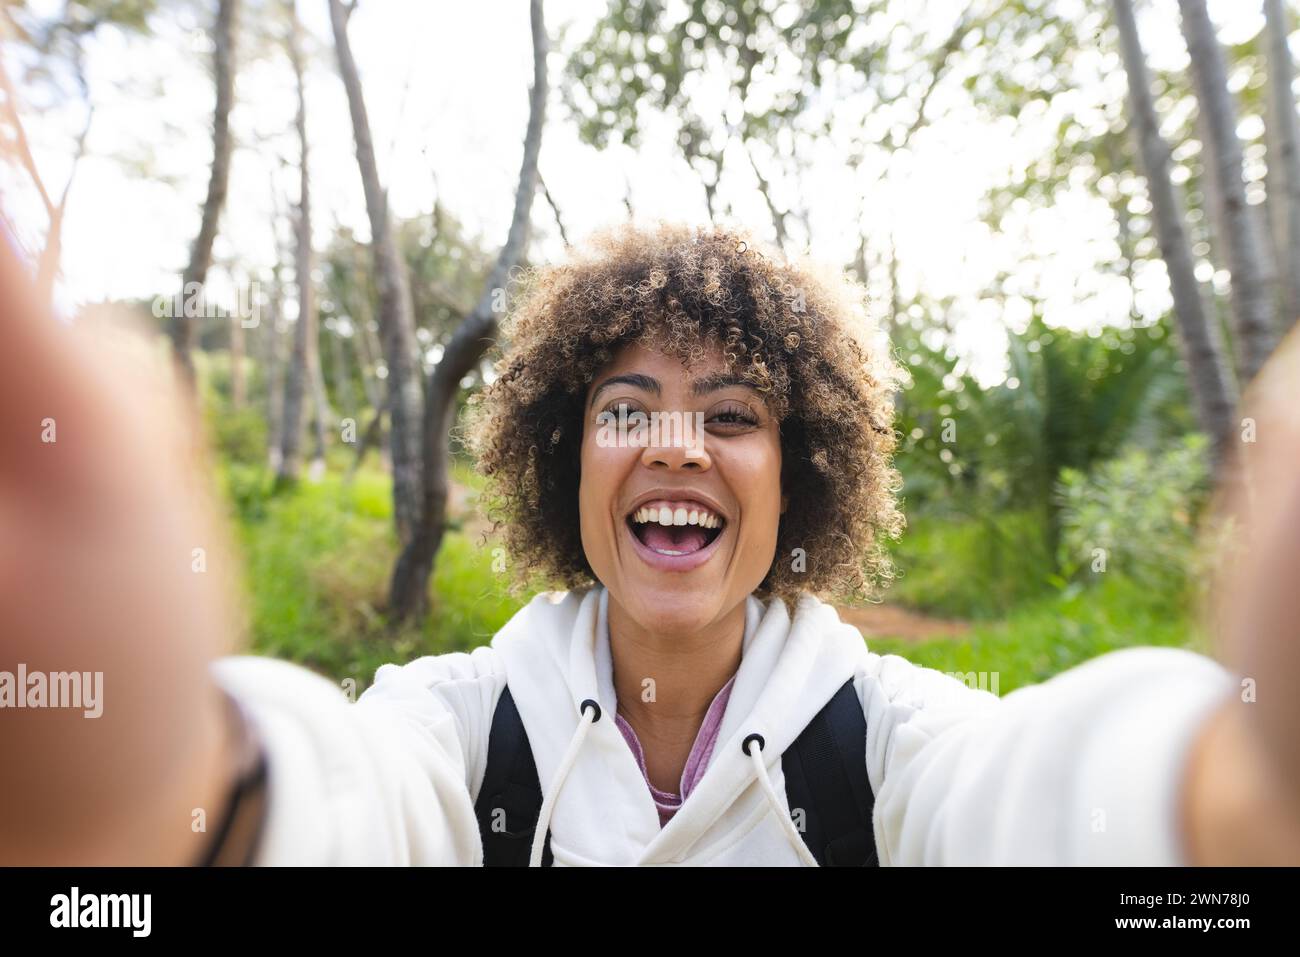 Young biracial woman with curly hair takes a selfie in a forested area on a hike Stock Photo